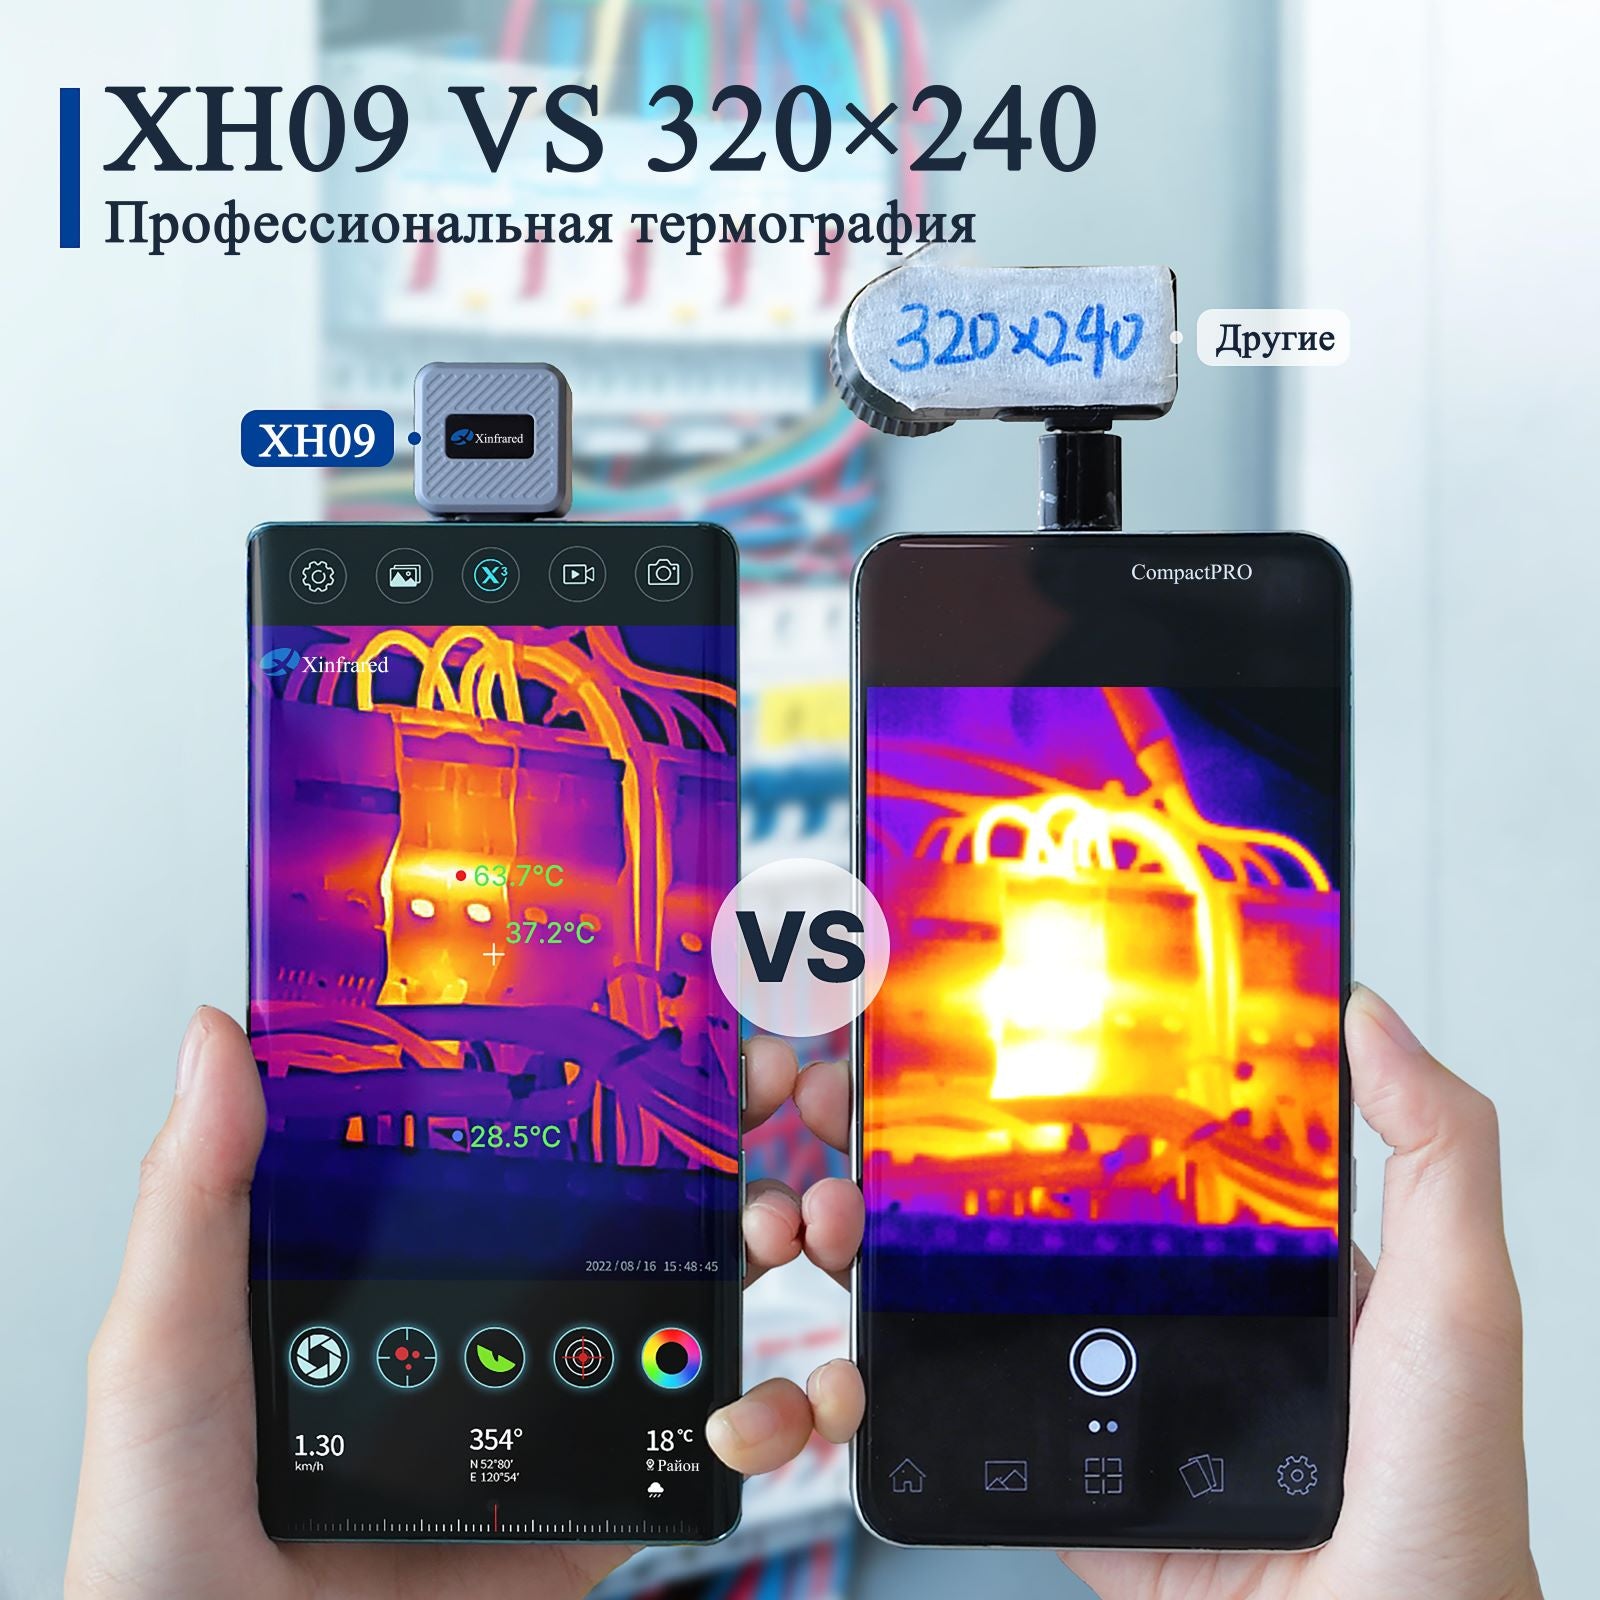 Xinfrared One XH09 The One, все в одном